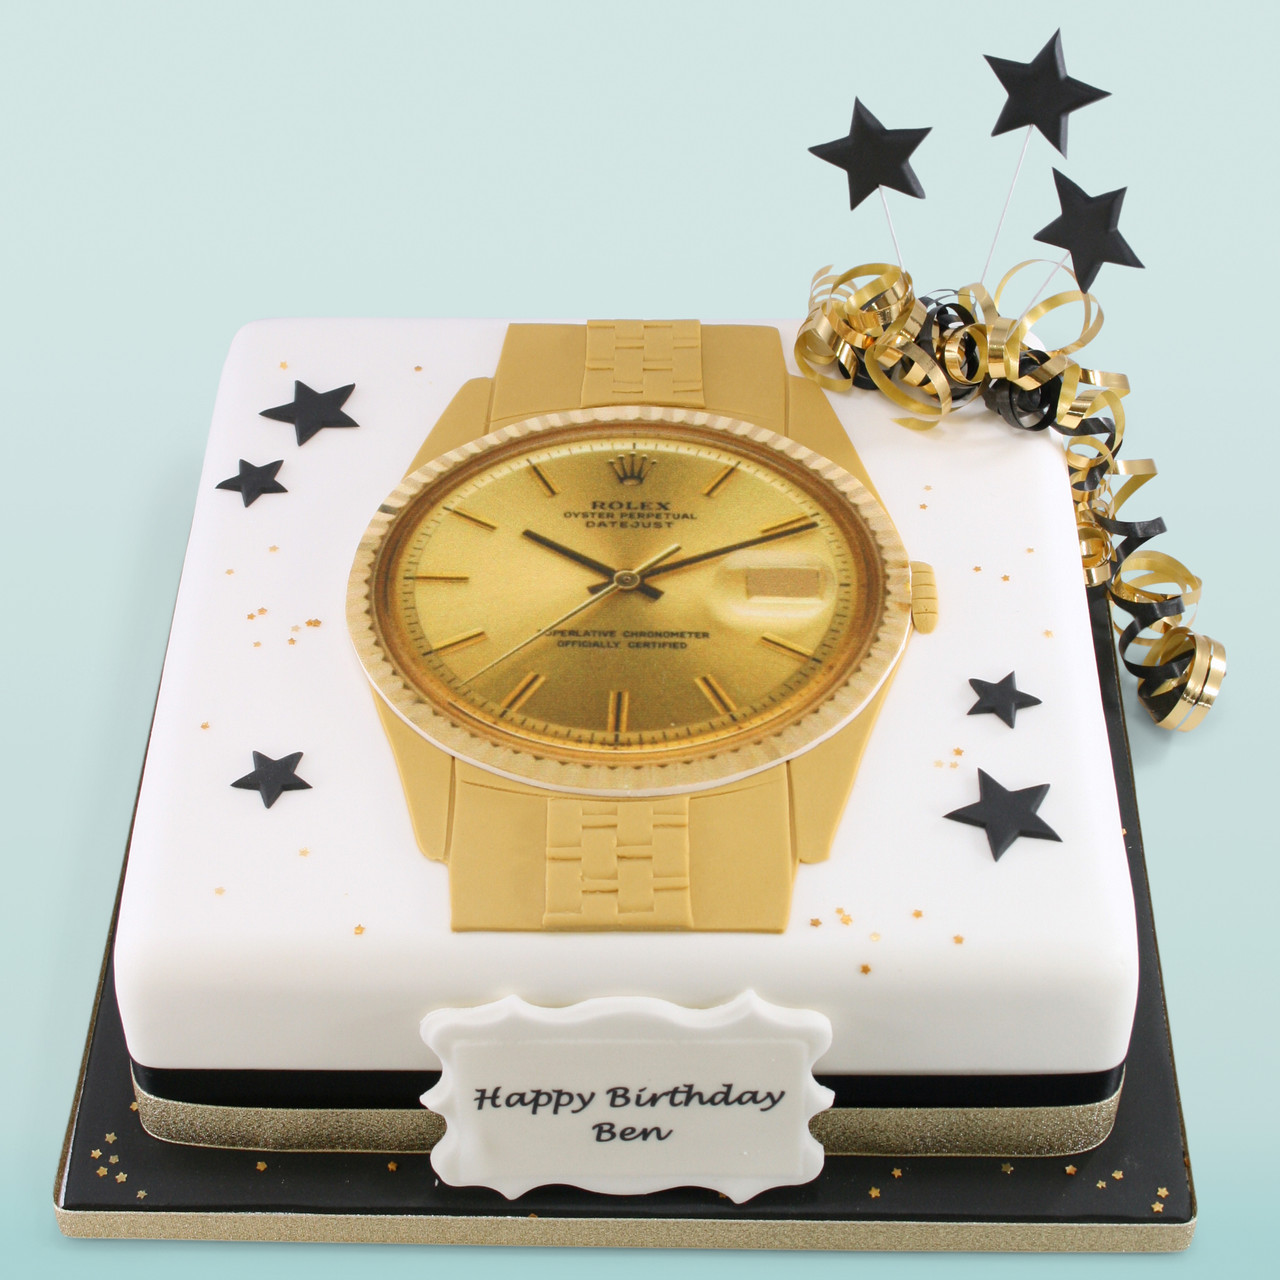 Luxury 5 inch | Cake Together | Online Birthday Cake Delivery - Cake  Together